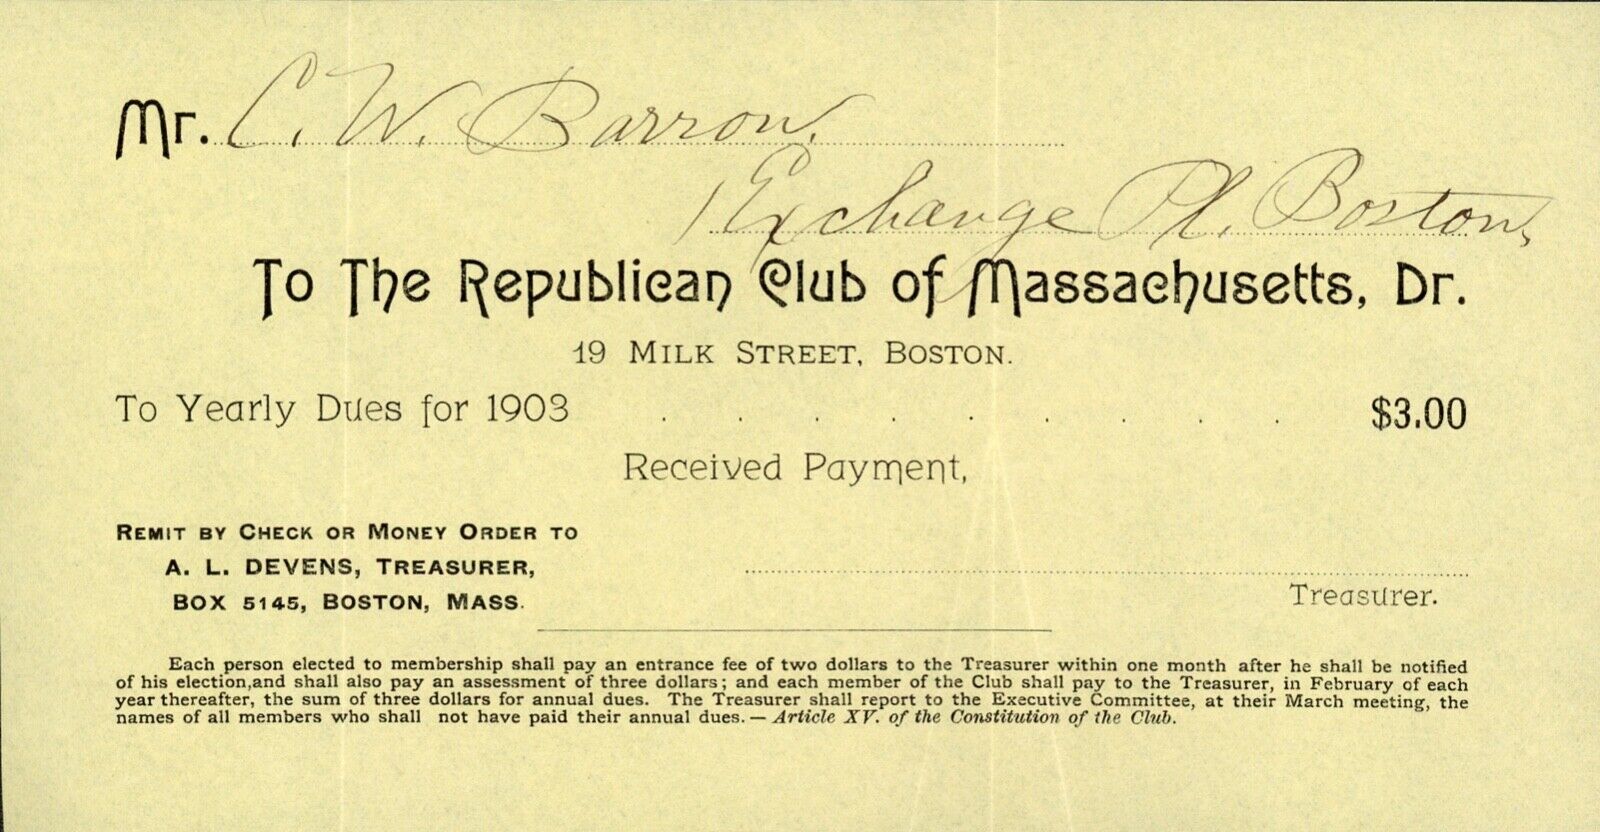 CLARENCE W. BARRON SIGNED Payment Voucher for Republican Club of MA • 1903